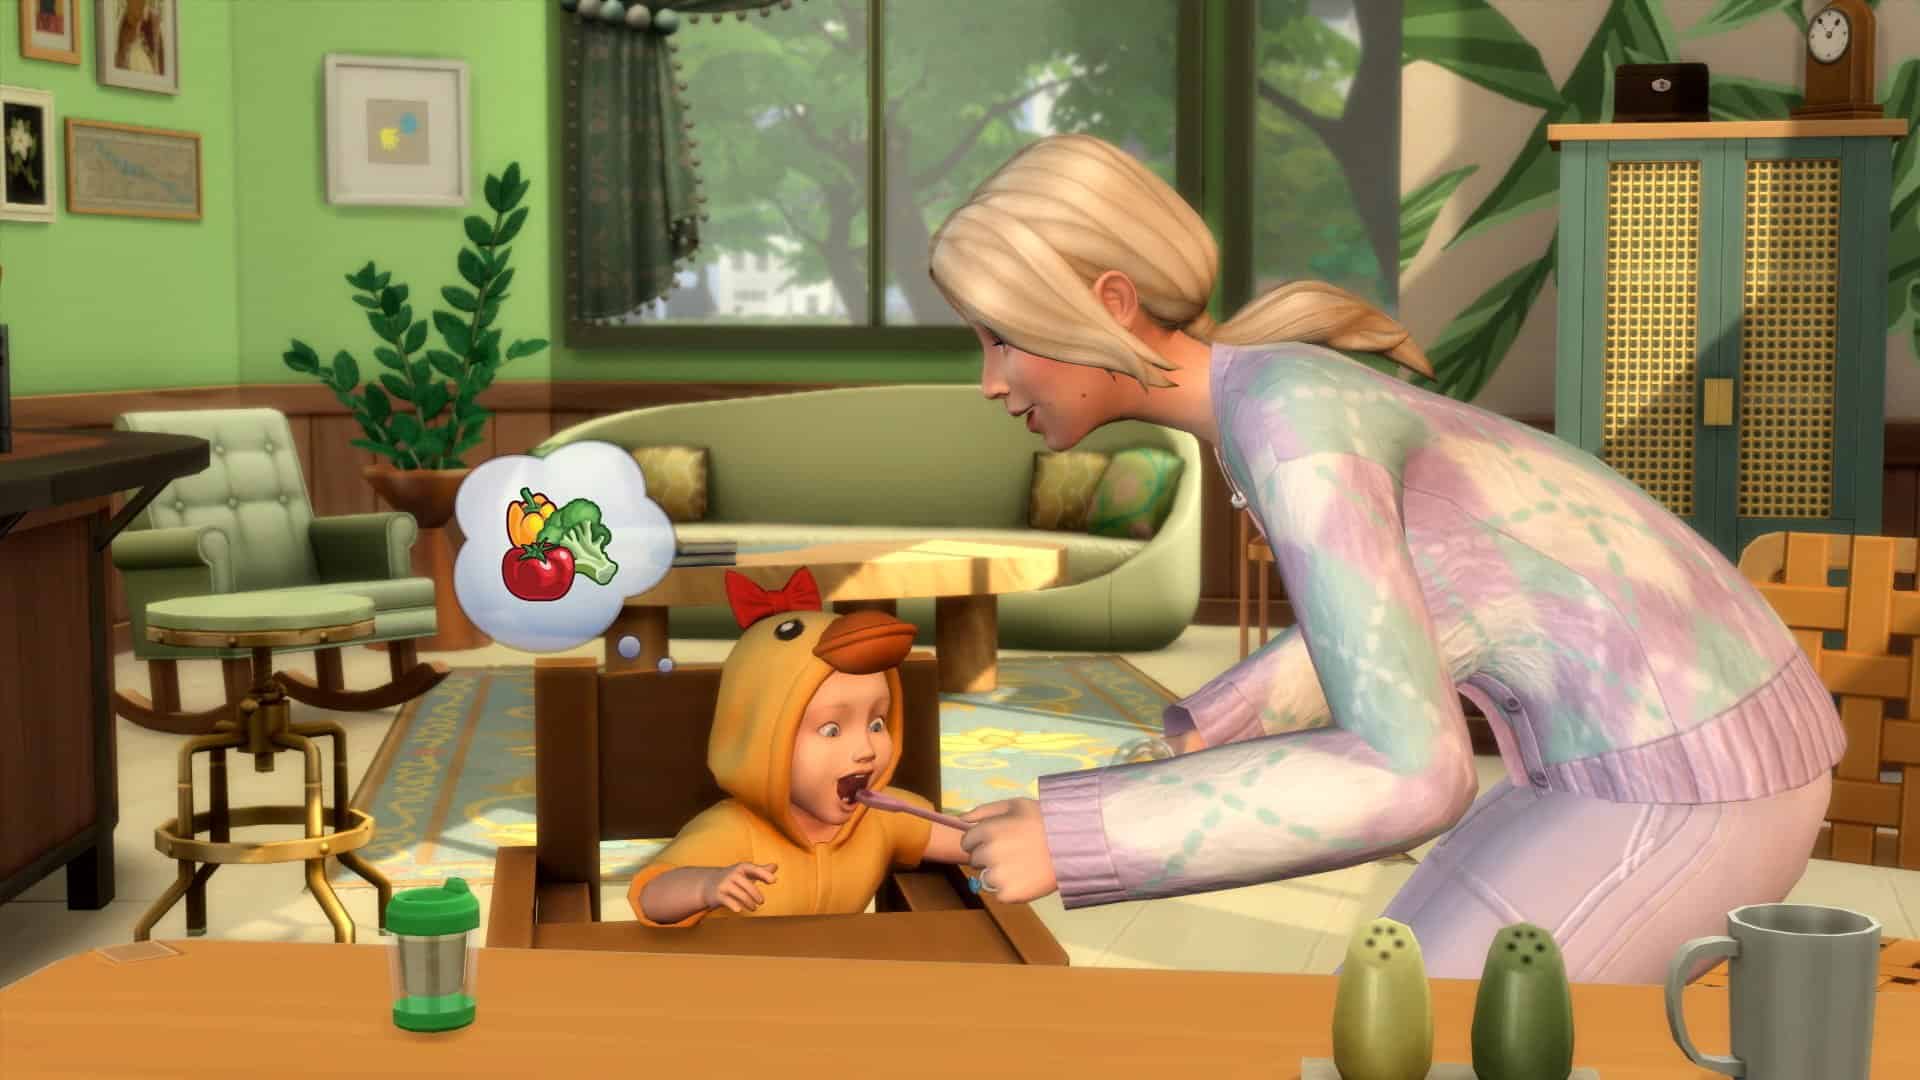 The Sims 4 infant update release date, time, and details